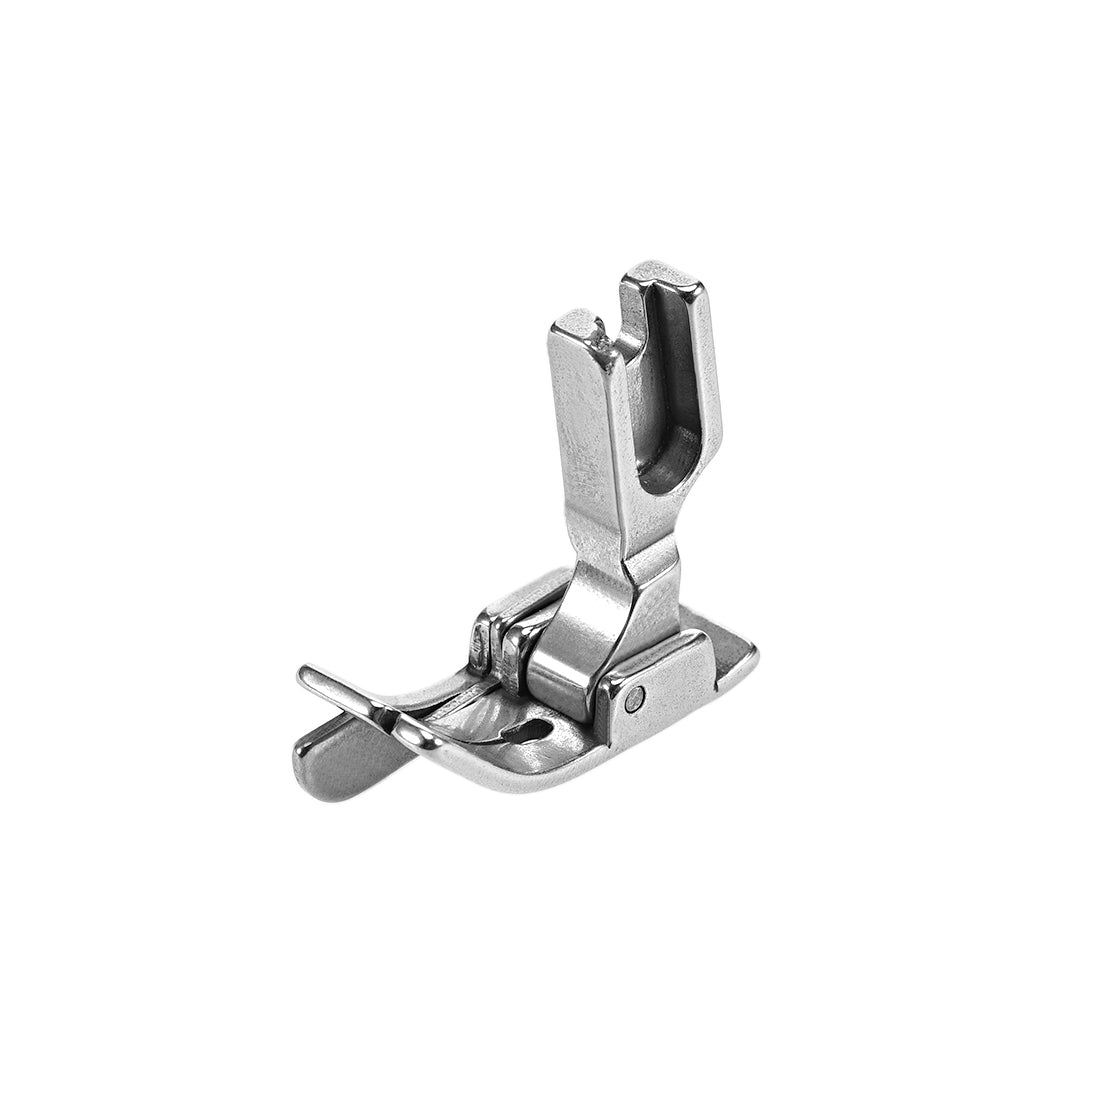 uxcell Uxcell #SP-18L Industrial Sewing Machine Hinged Presser Foot  with Left Guide 1/4" (6mm)